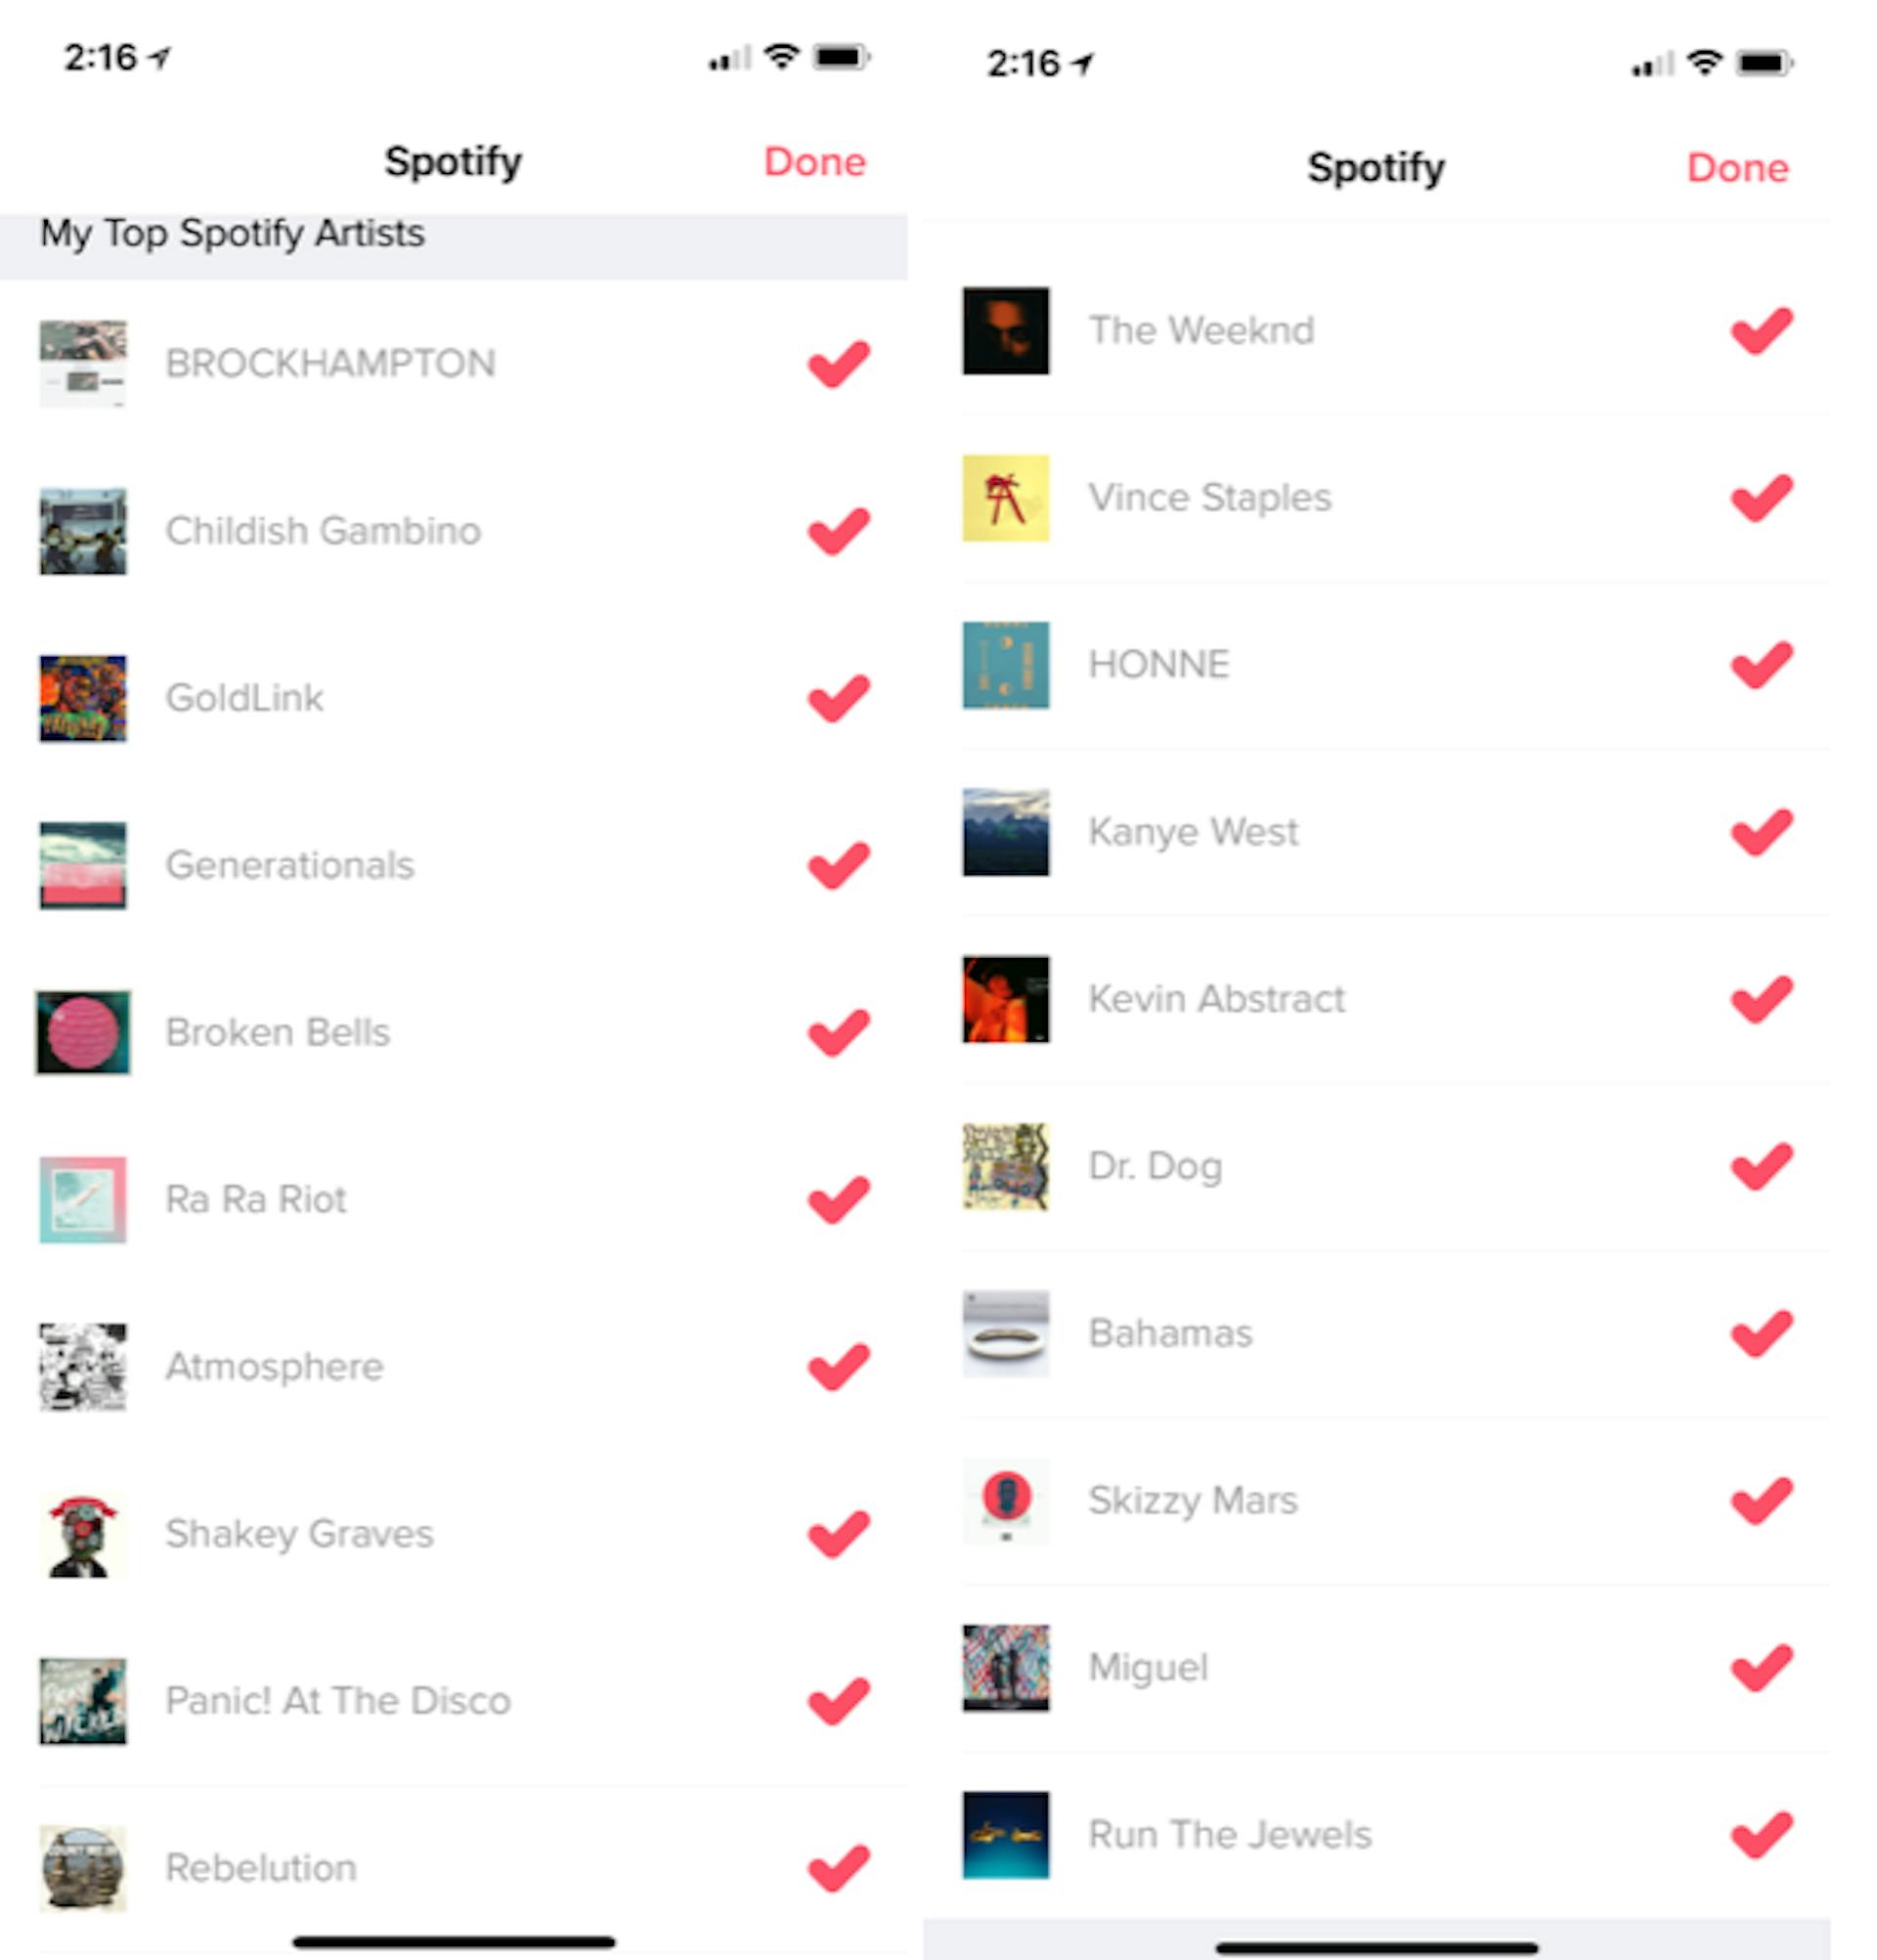 Screenshot of my Top Spotify Artists screen in the Tinder iOS app.